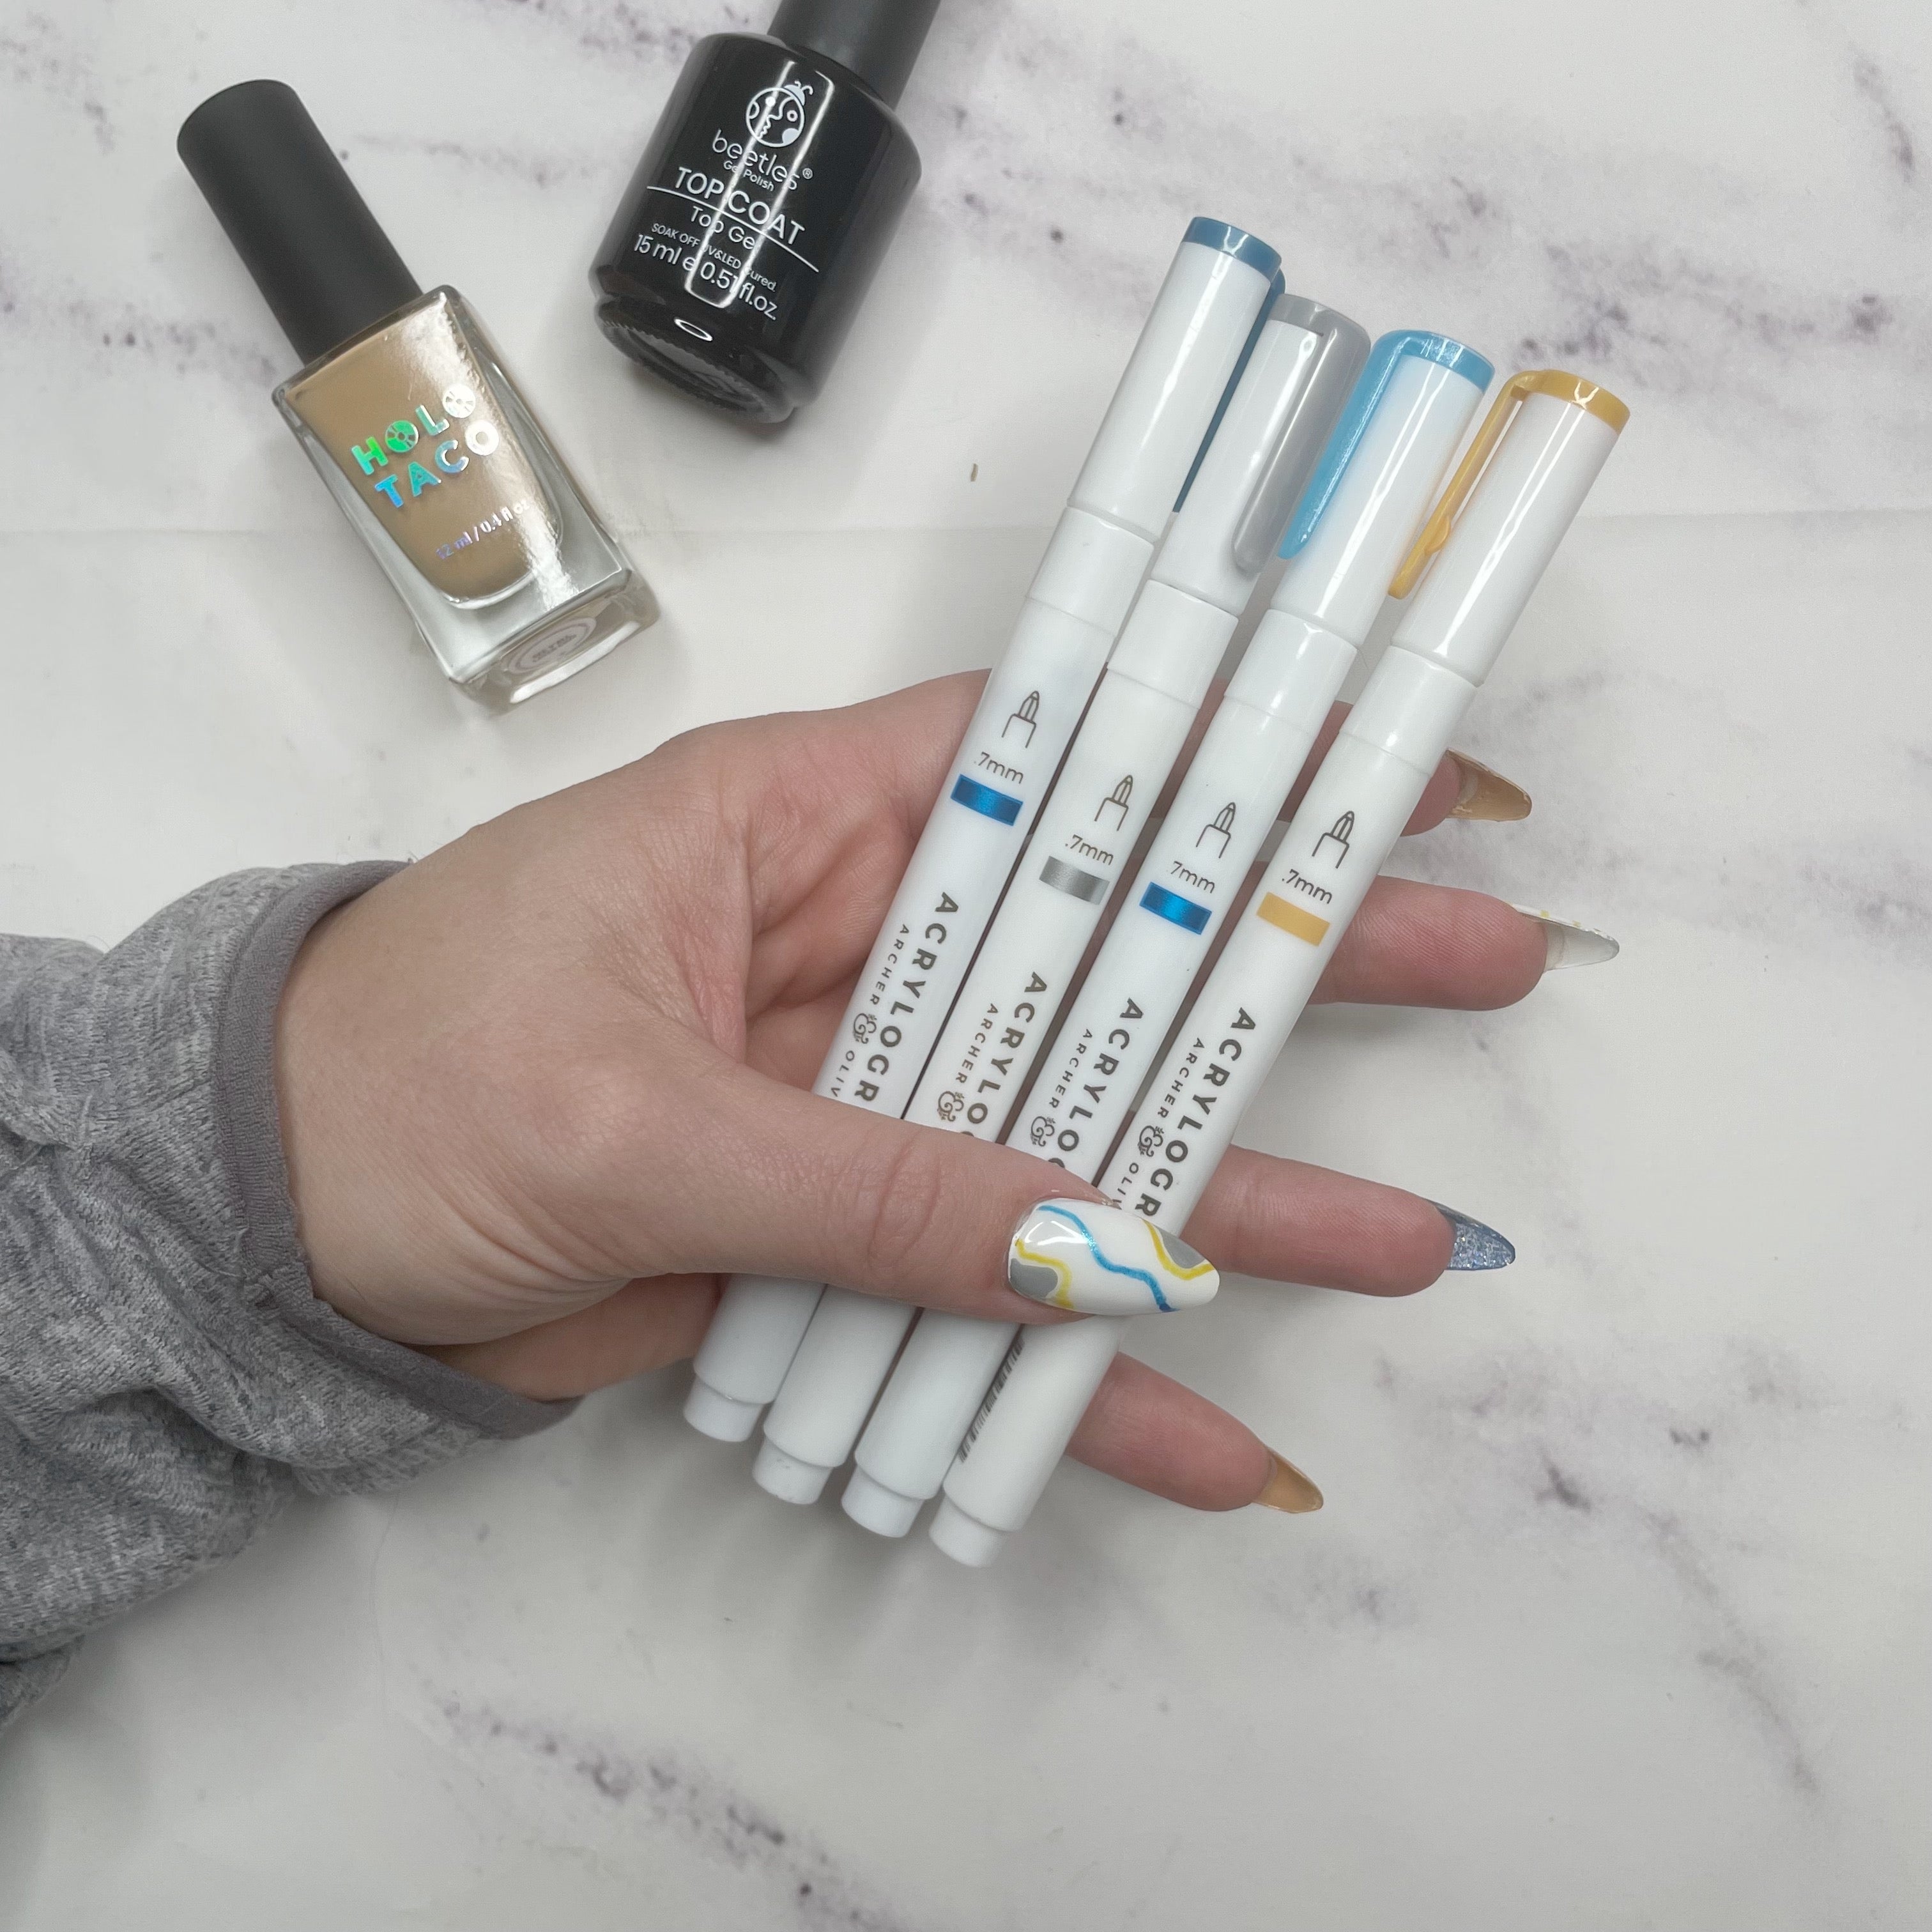 Acrylogrpah pens used on nails including silver metallic, blue metallic, blue glitter, and golden hour